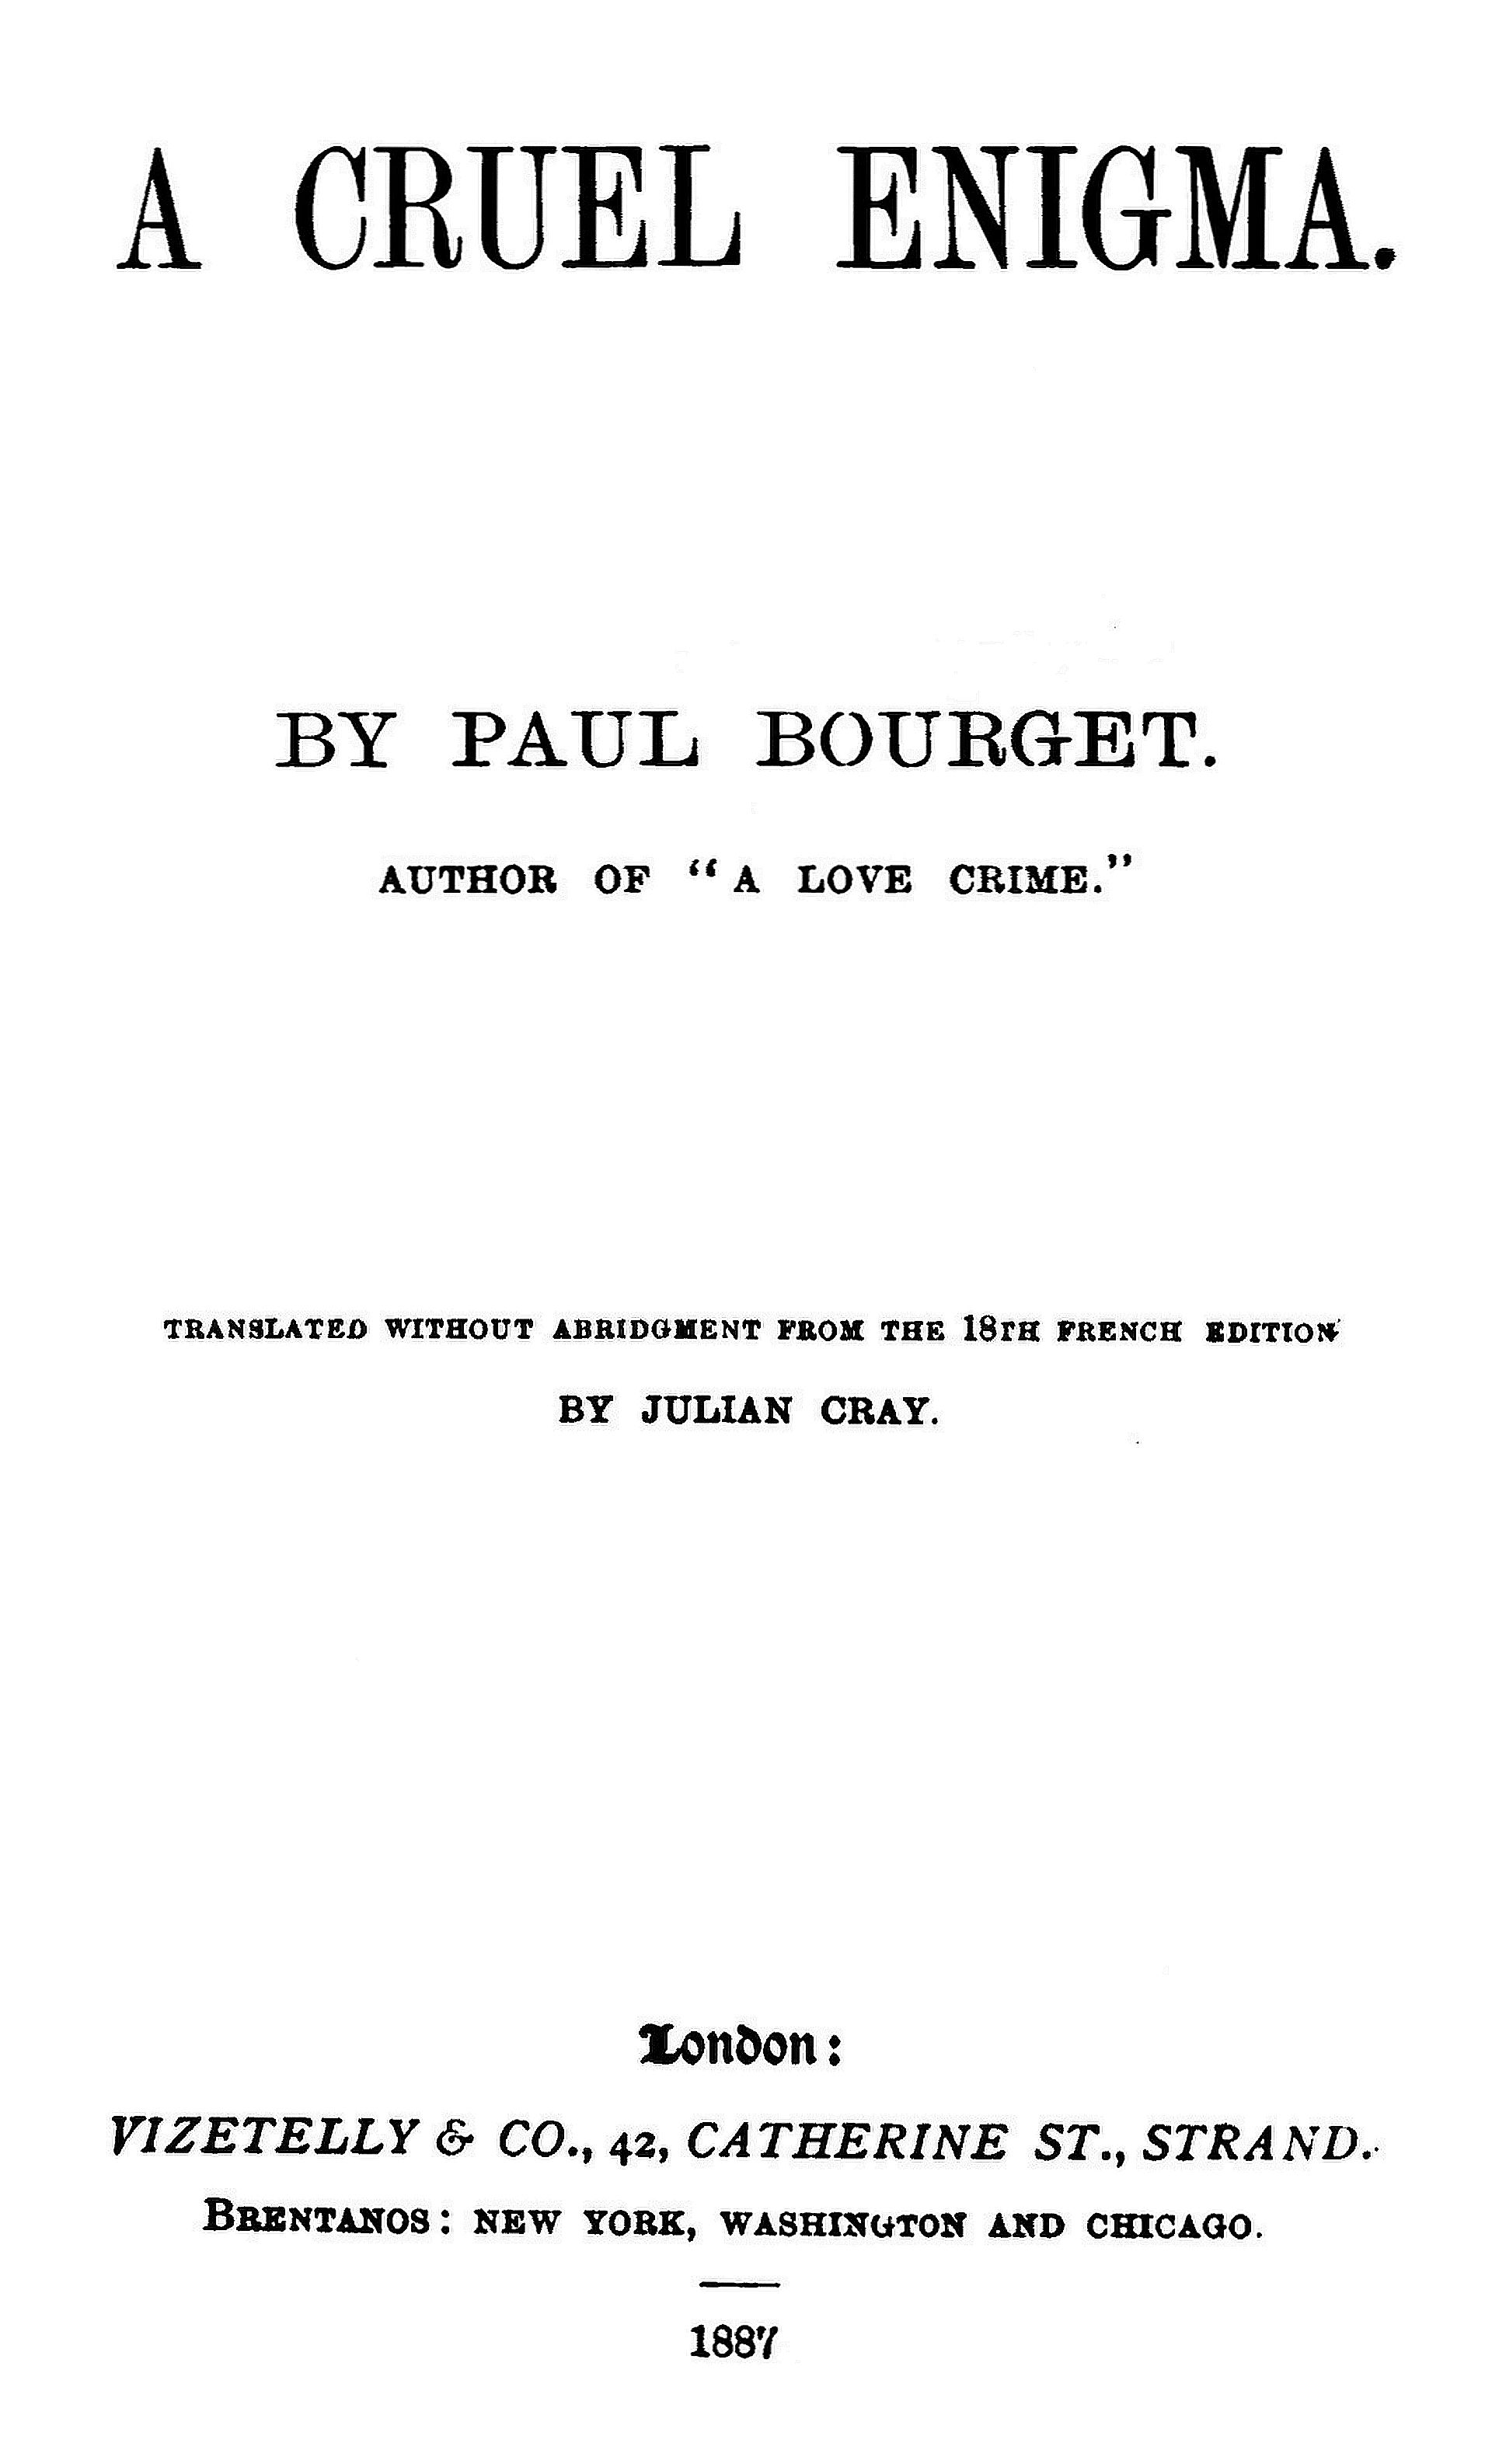 The Project Gutenberg eBook of A Cruel Enigma, by Paul Bourget. picture picture